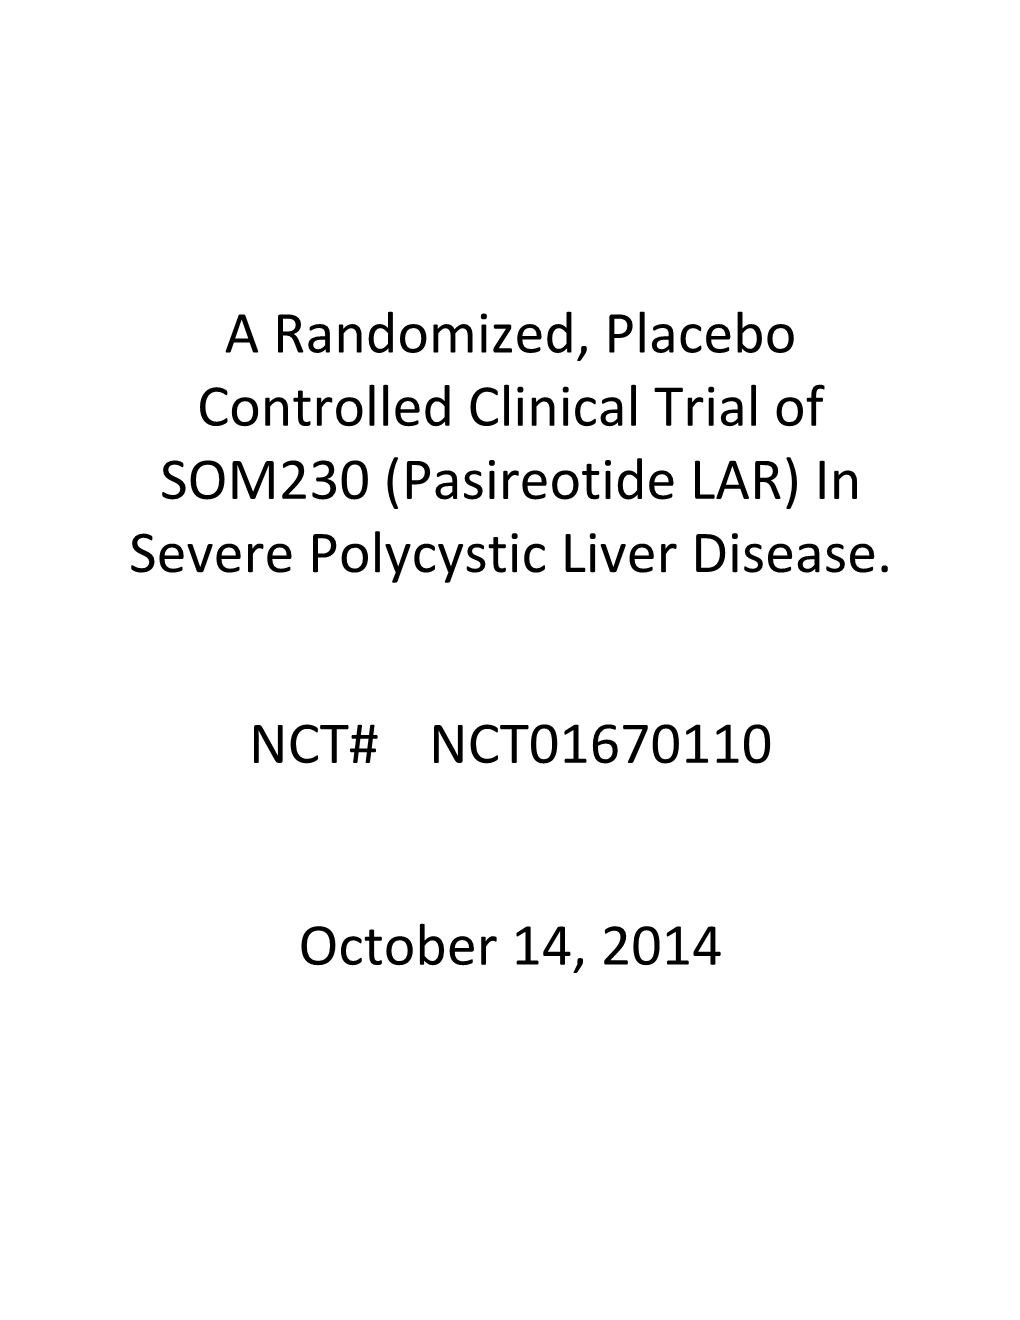 (Pasireotide LAR) in Severe Polycystic Liver Disease. NCT# NCT0167011